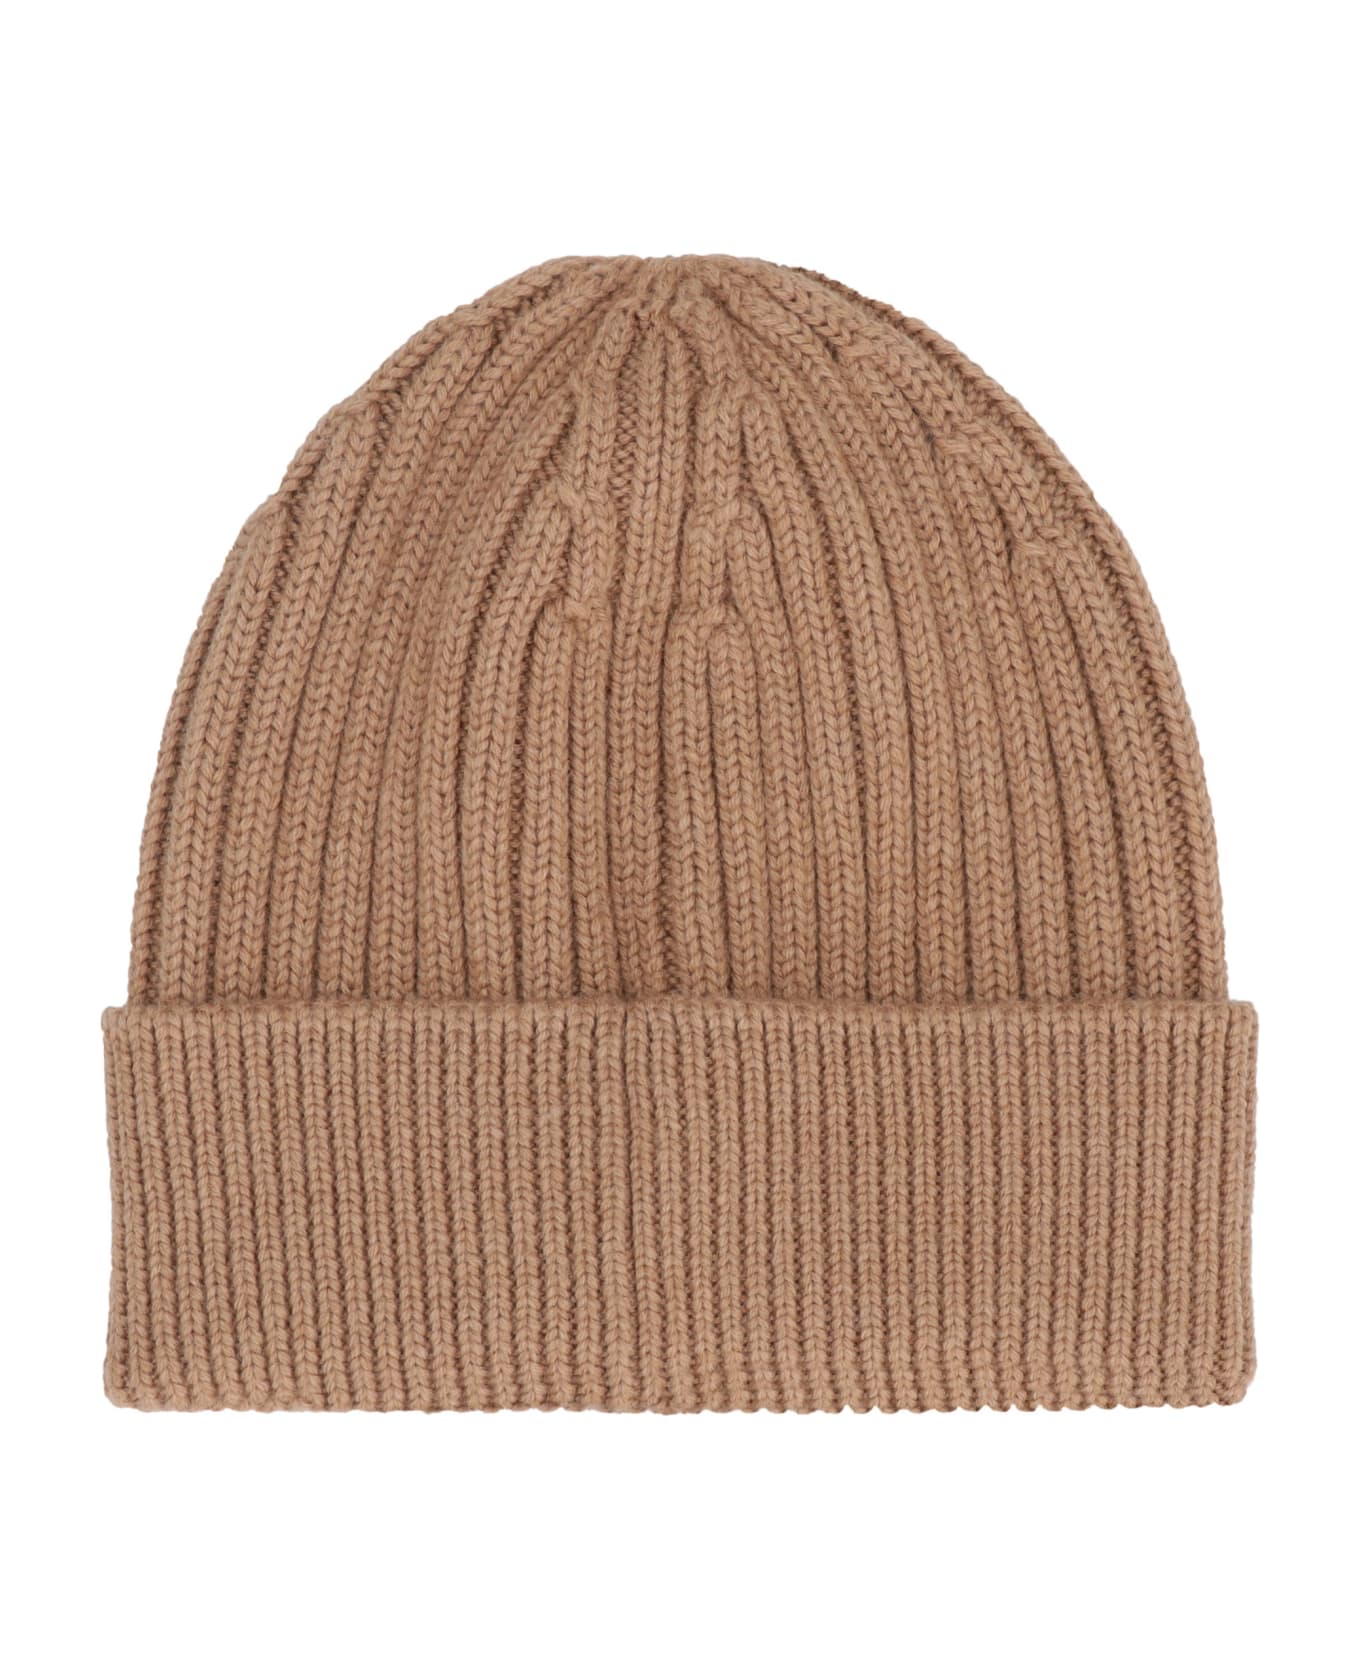 Moncler Grenoble Ribbed Knit Beanie - Camel